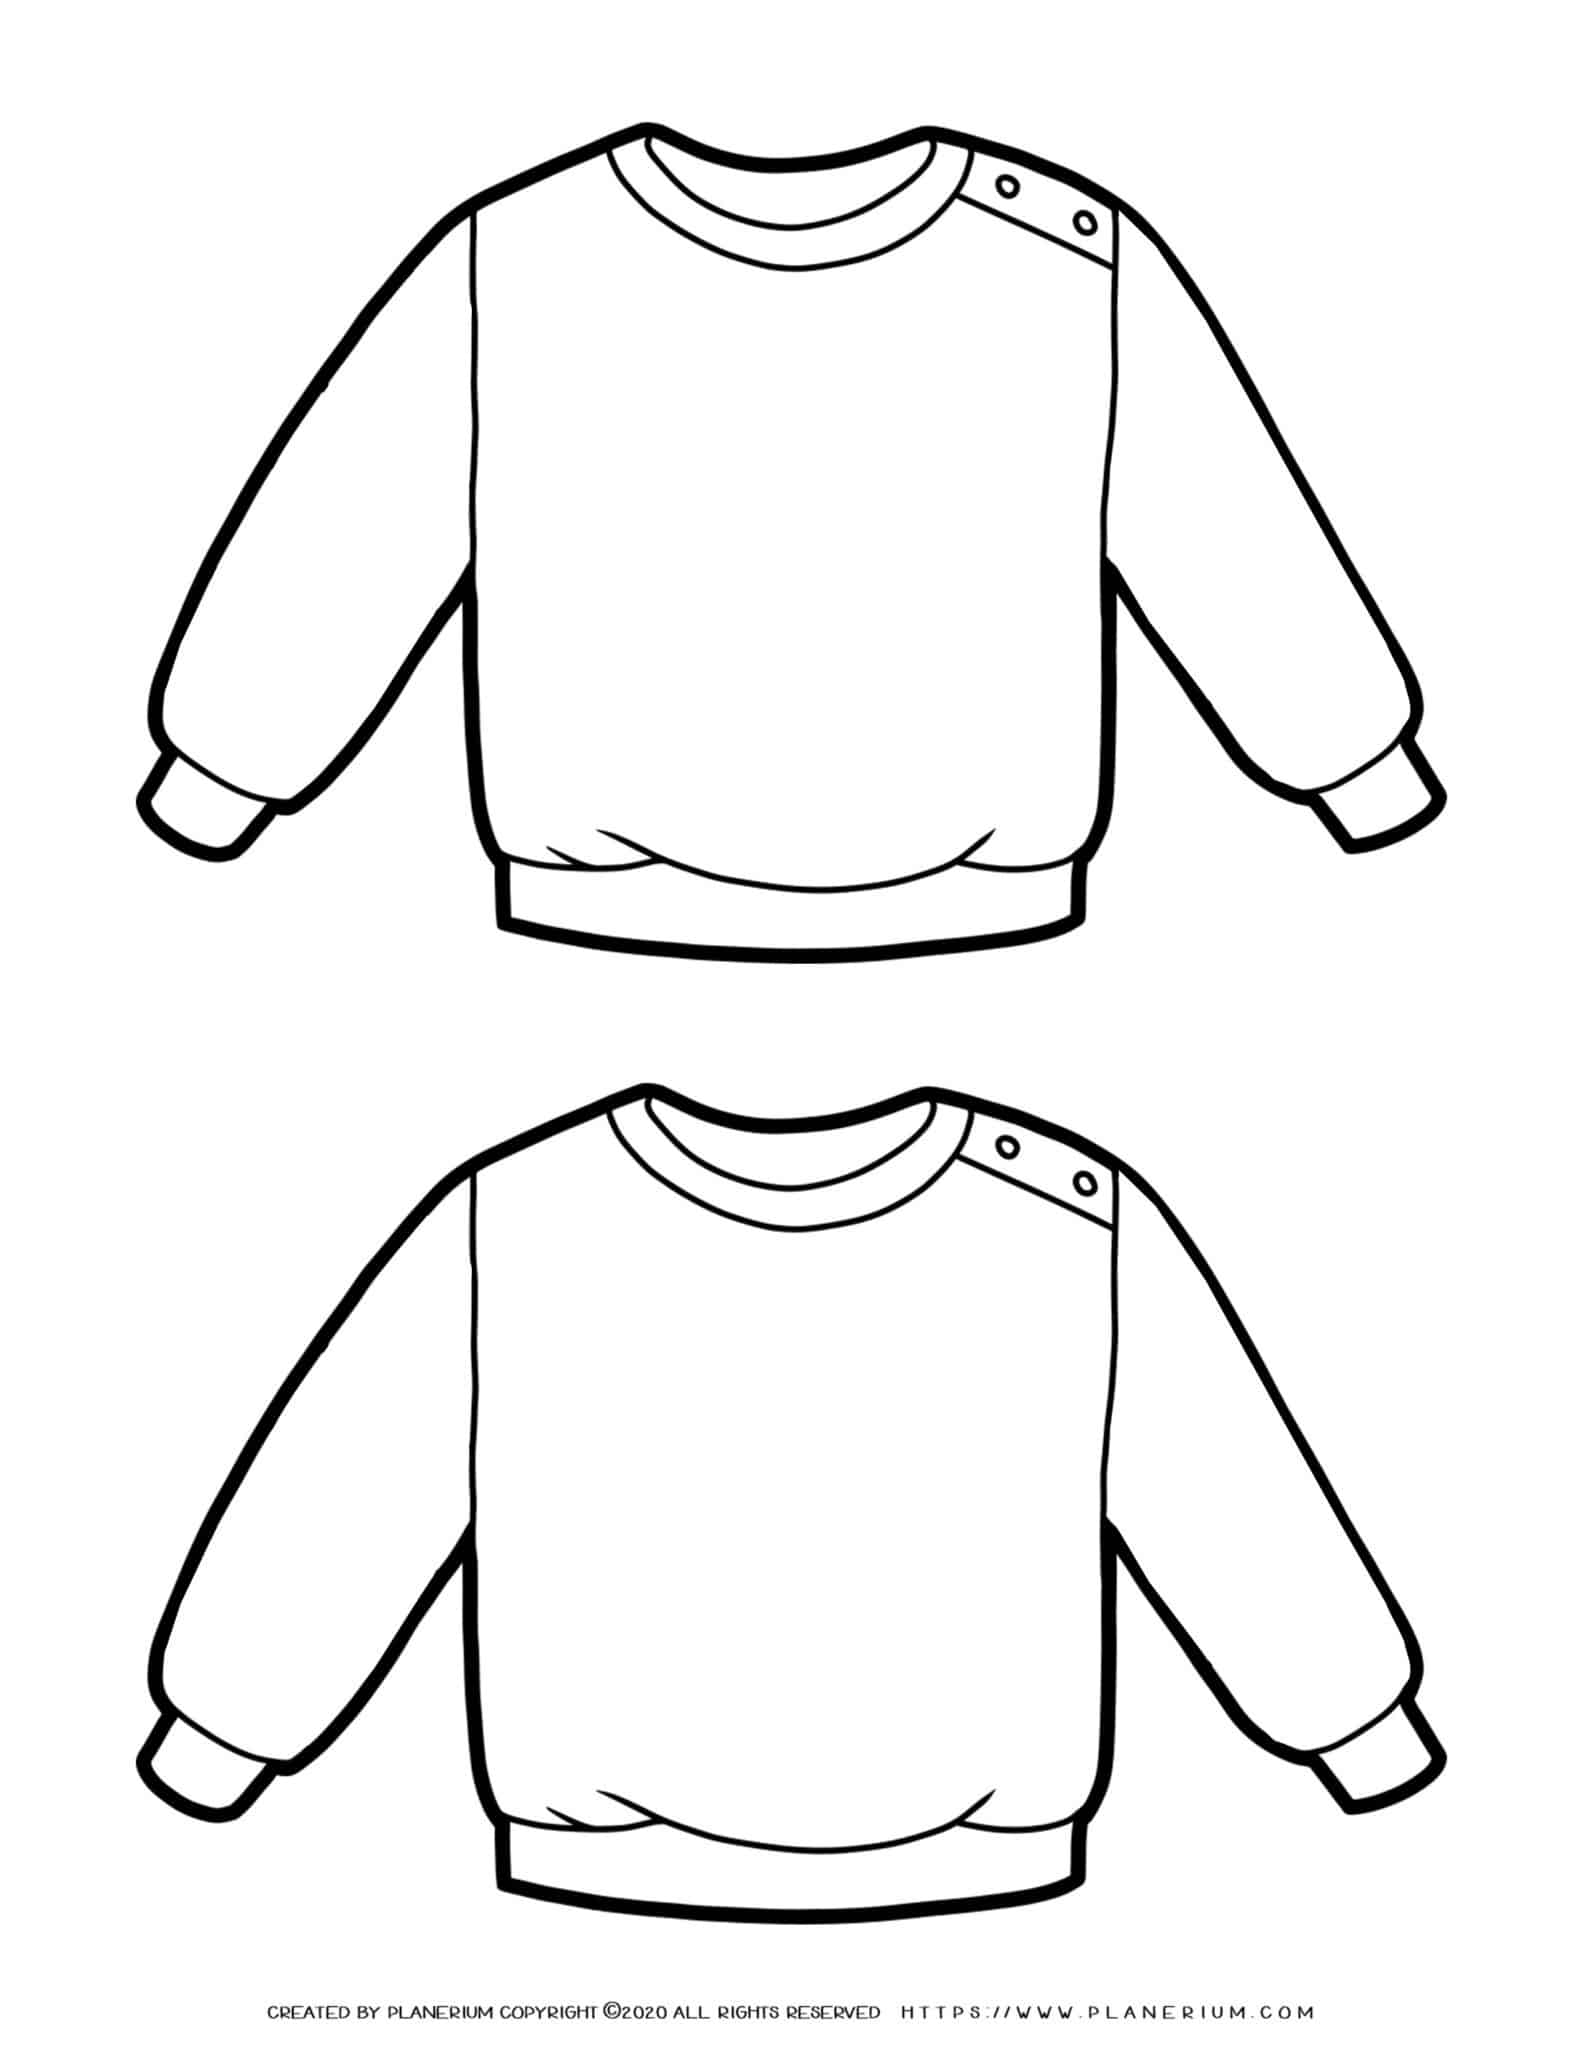 cut-out-free-printable-sweater-template-next-set-up-an-ugly-sweater